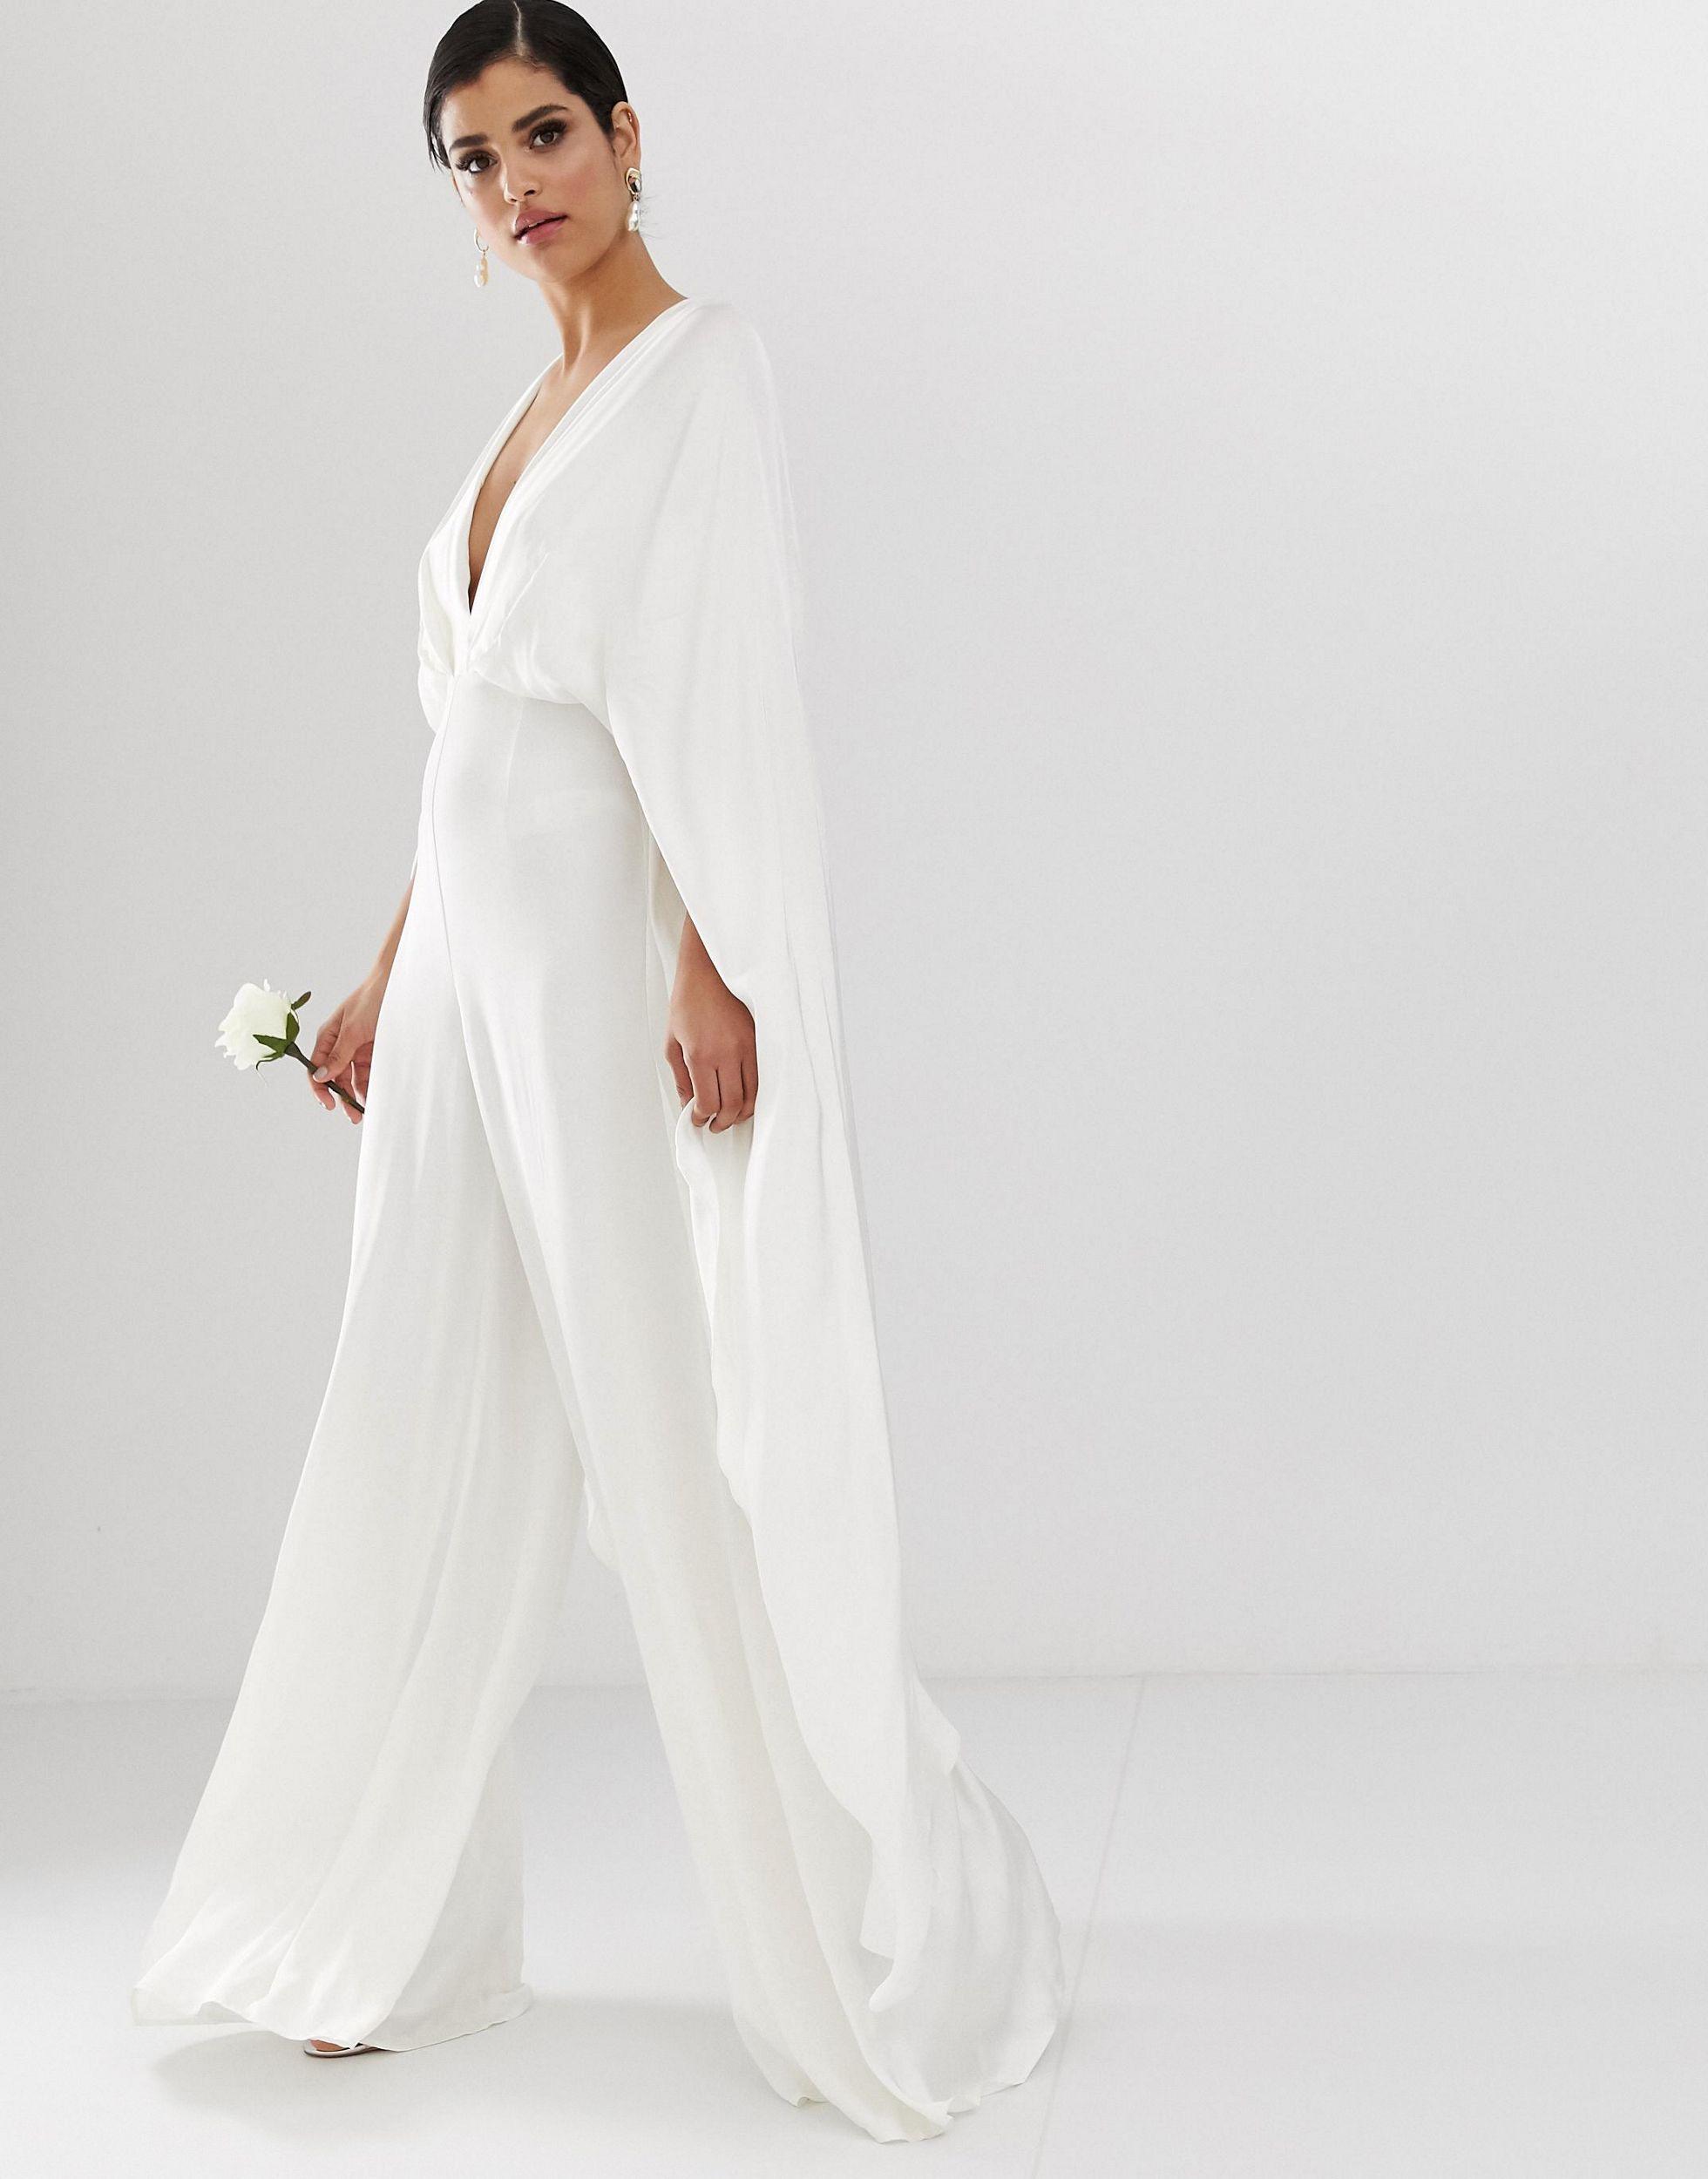 Our Favorite Wedding Jumpsuits for 2020 | A Practical Wedding